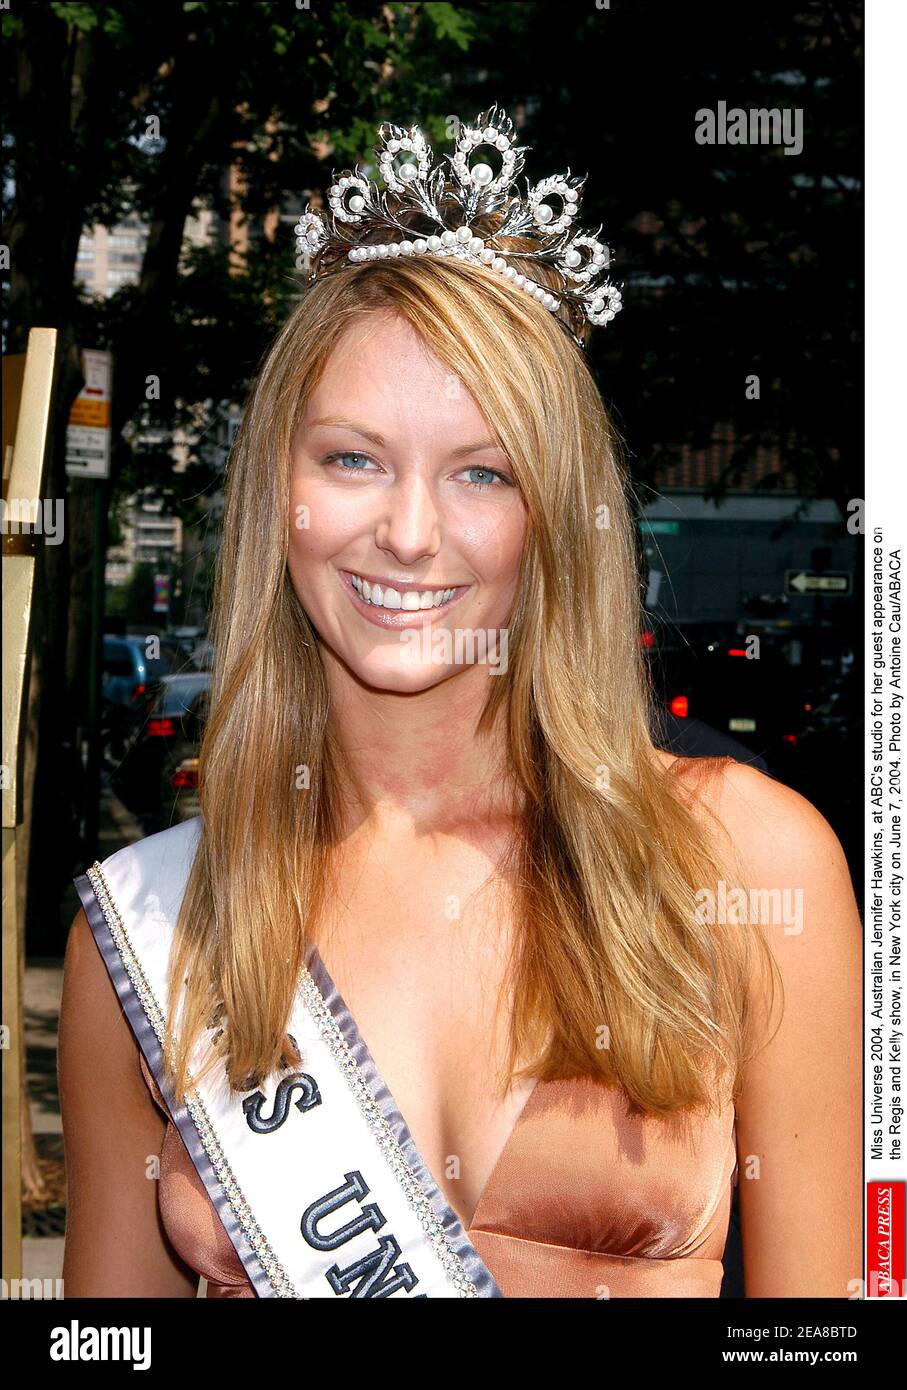 Miss Universe 2004, Australian Jennifer Hawkins, at ABC's studio for her guest appearance on the Regis and Kelly show, in New York city on June 7, 2004. Photo by Antoine Cau/ABACA Stock Photo